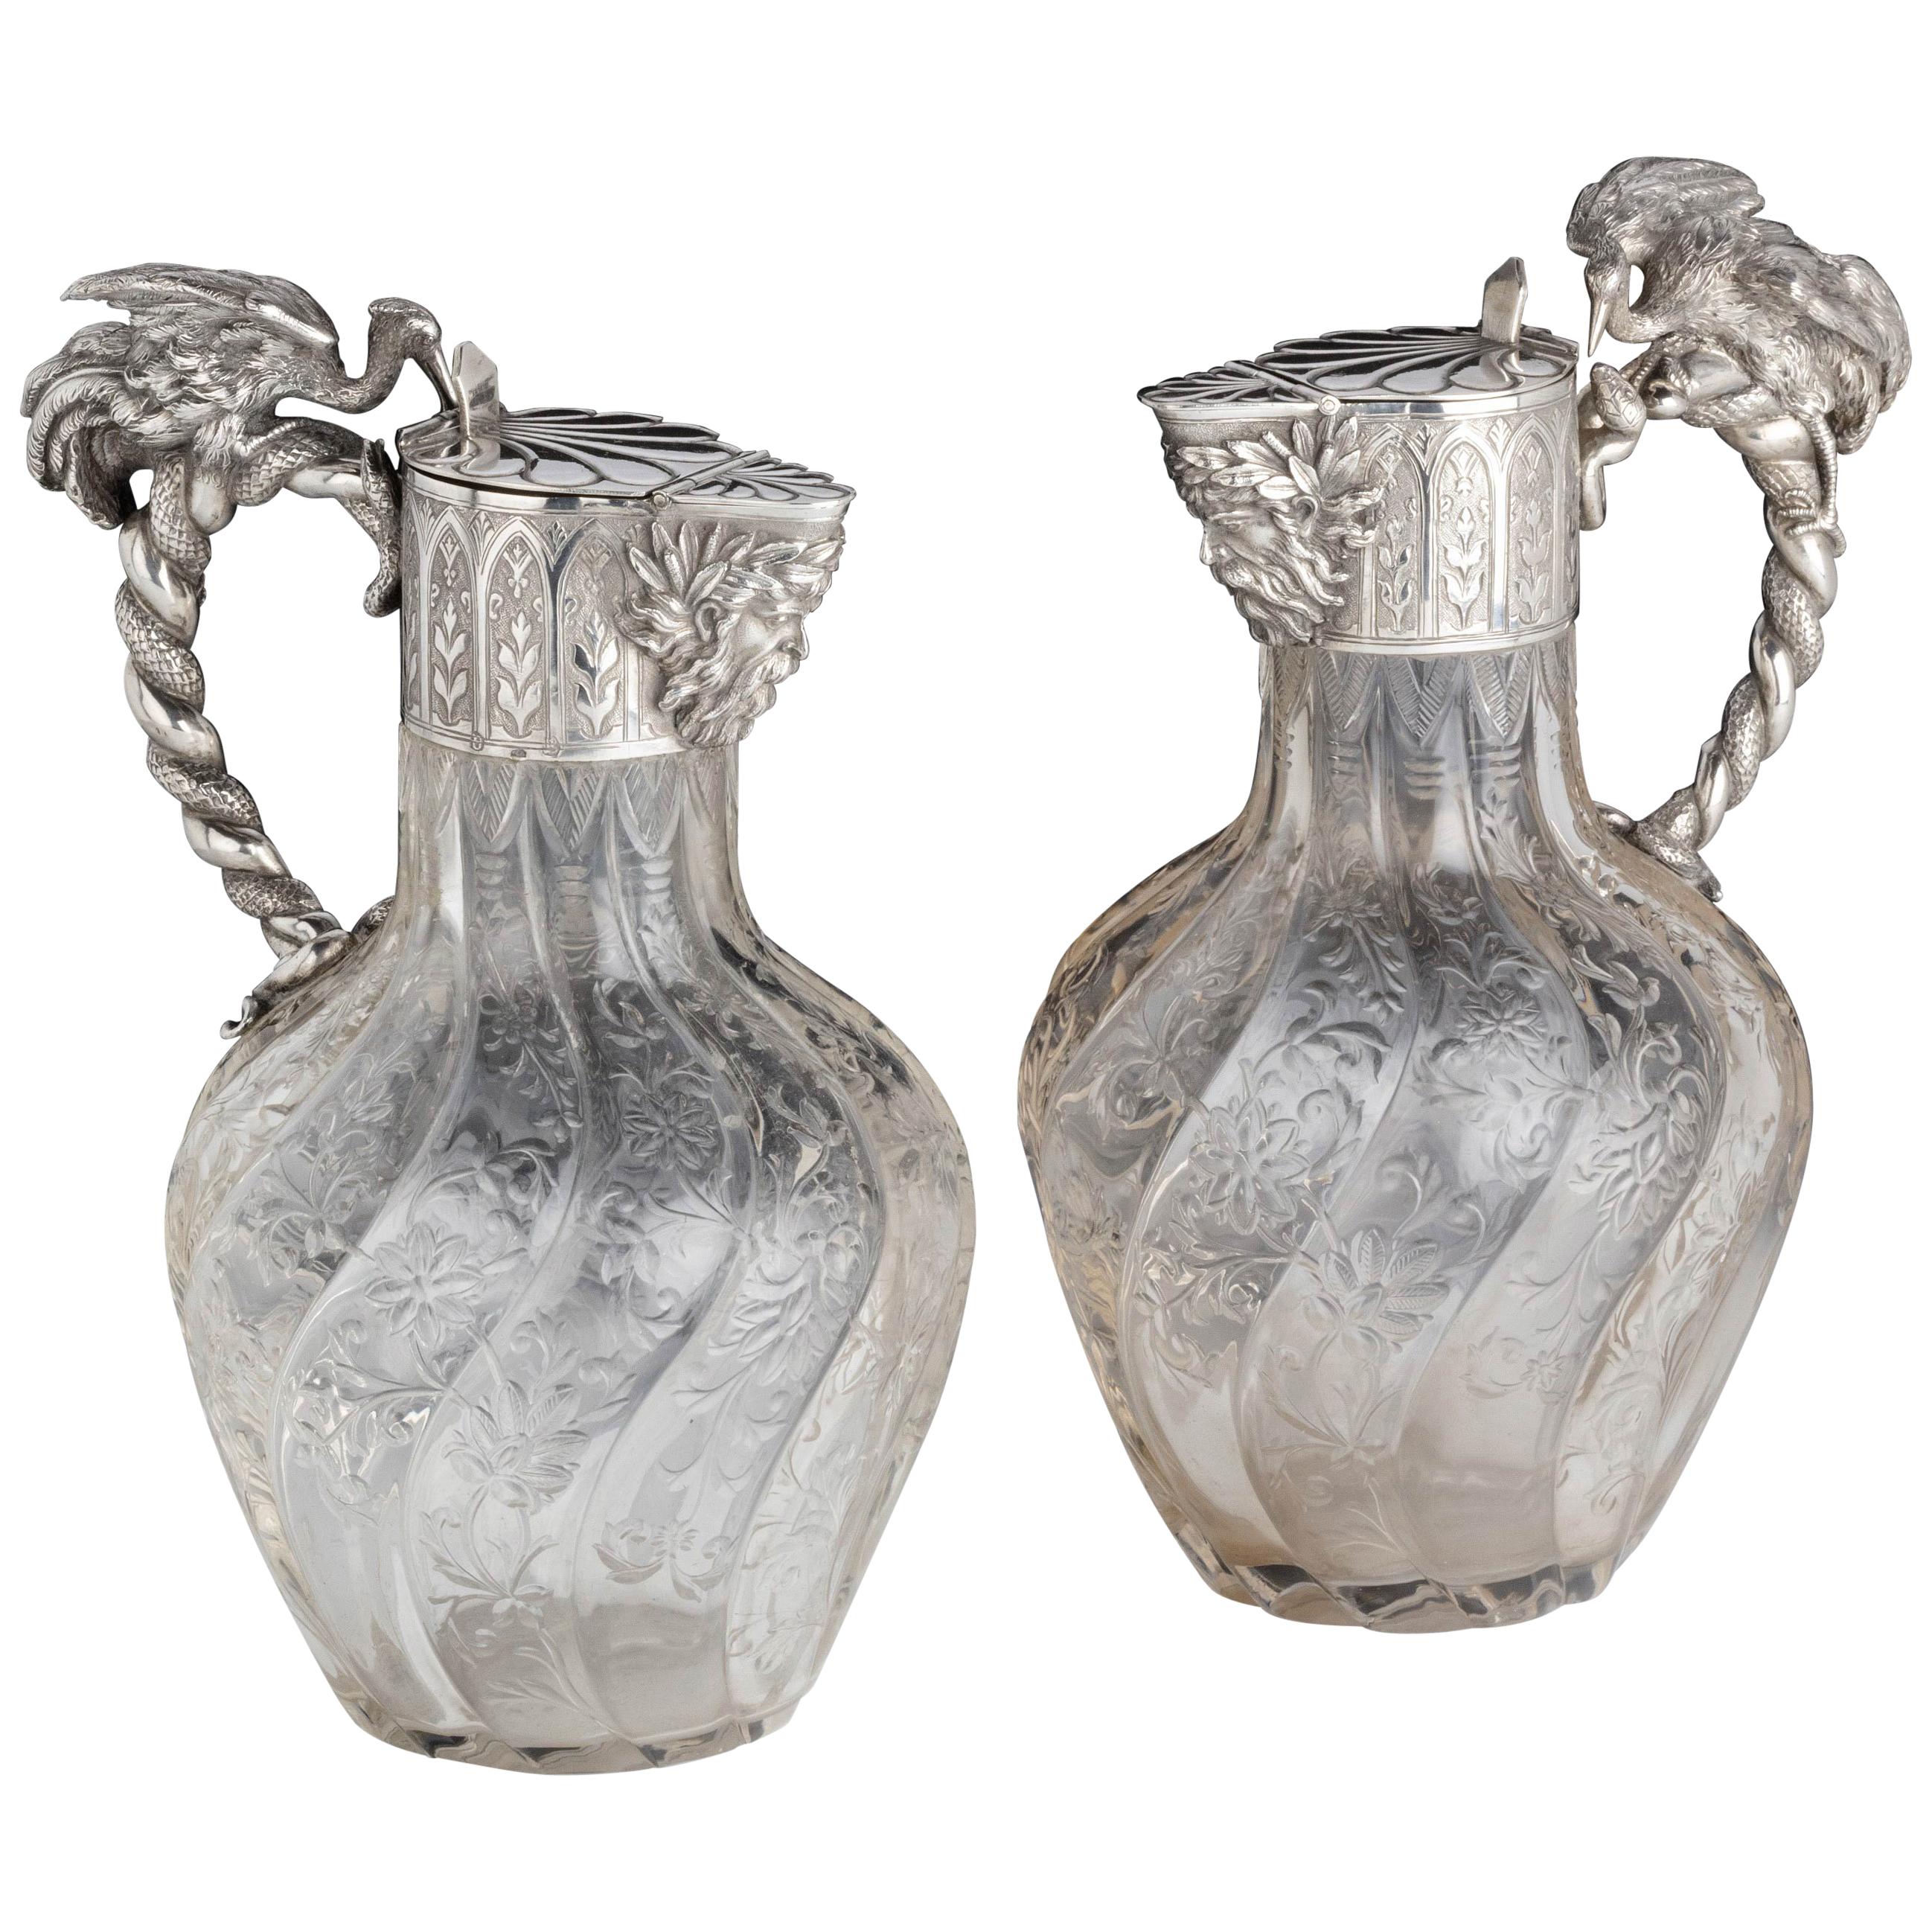 Exceptional Pair of French Silver Claret Jugs